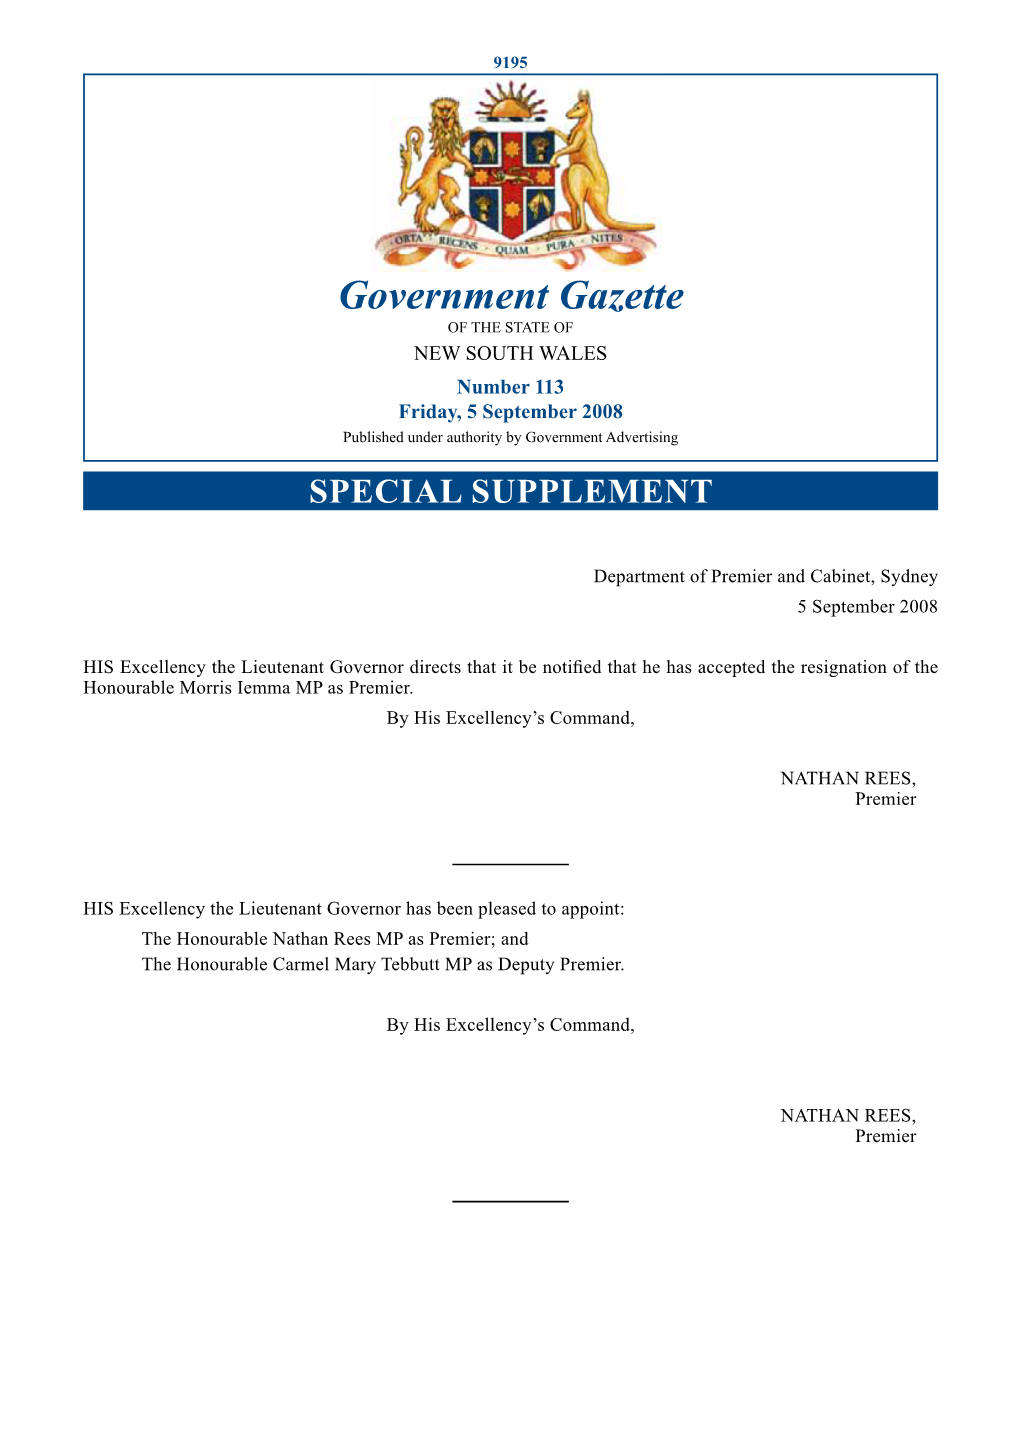 Government Gazette of the STATE of NEW SOUTH WALES Number 113 Friday, 5 September 2008 Published Under Authority by Government Advertising SPECIAL SUPPLEMENT